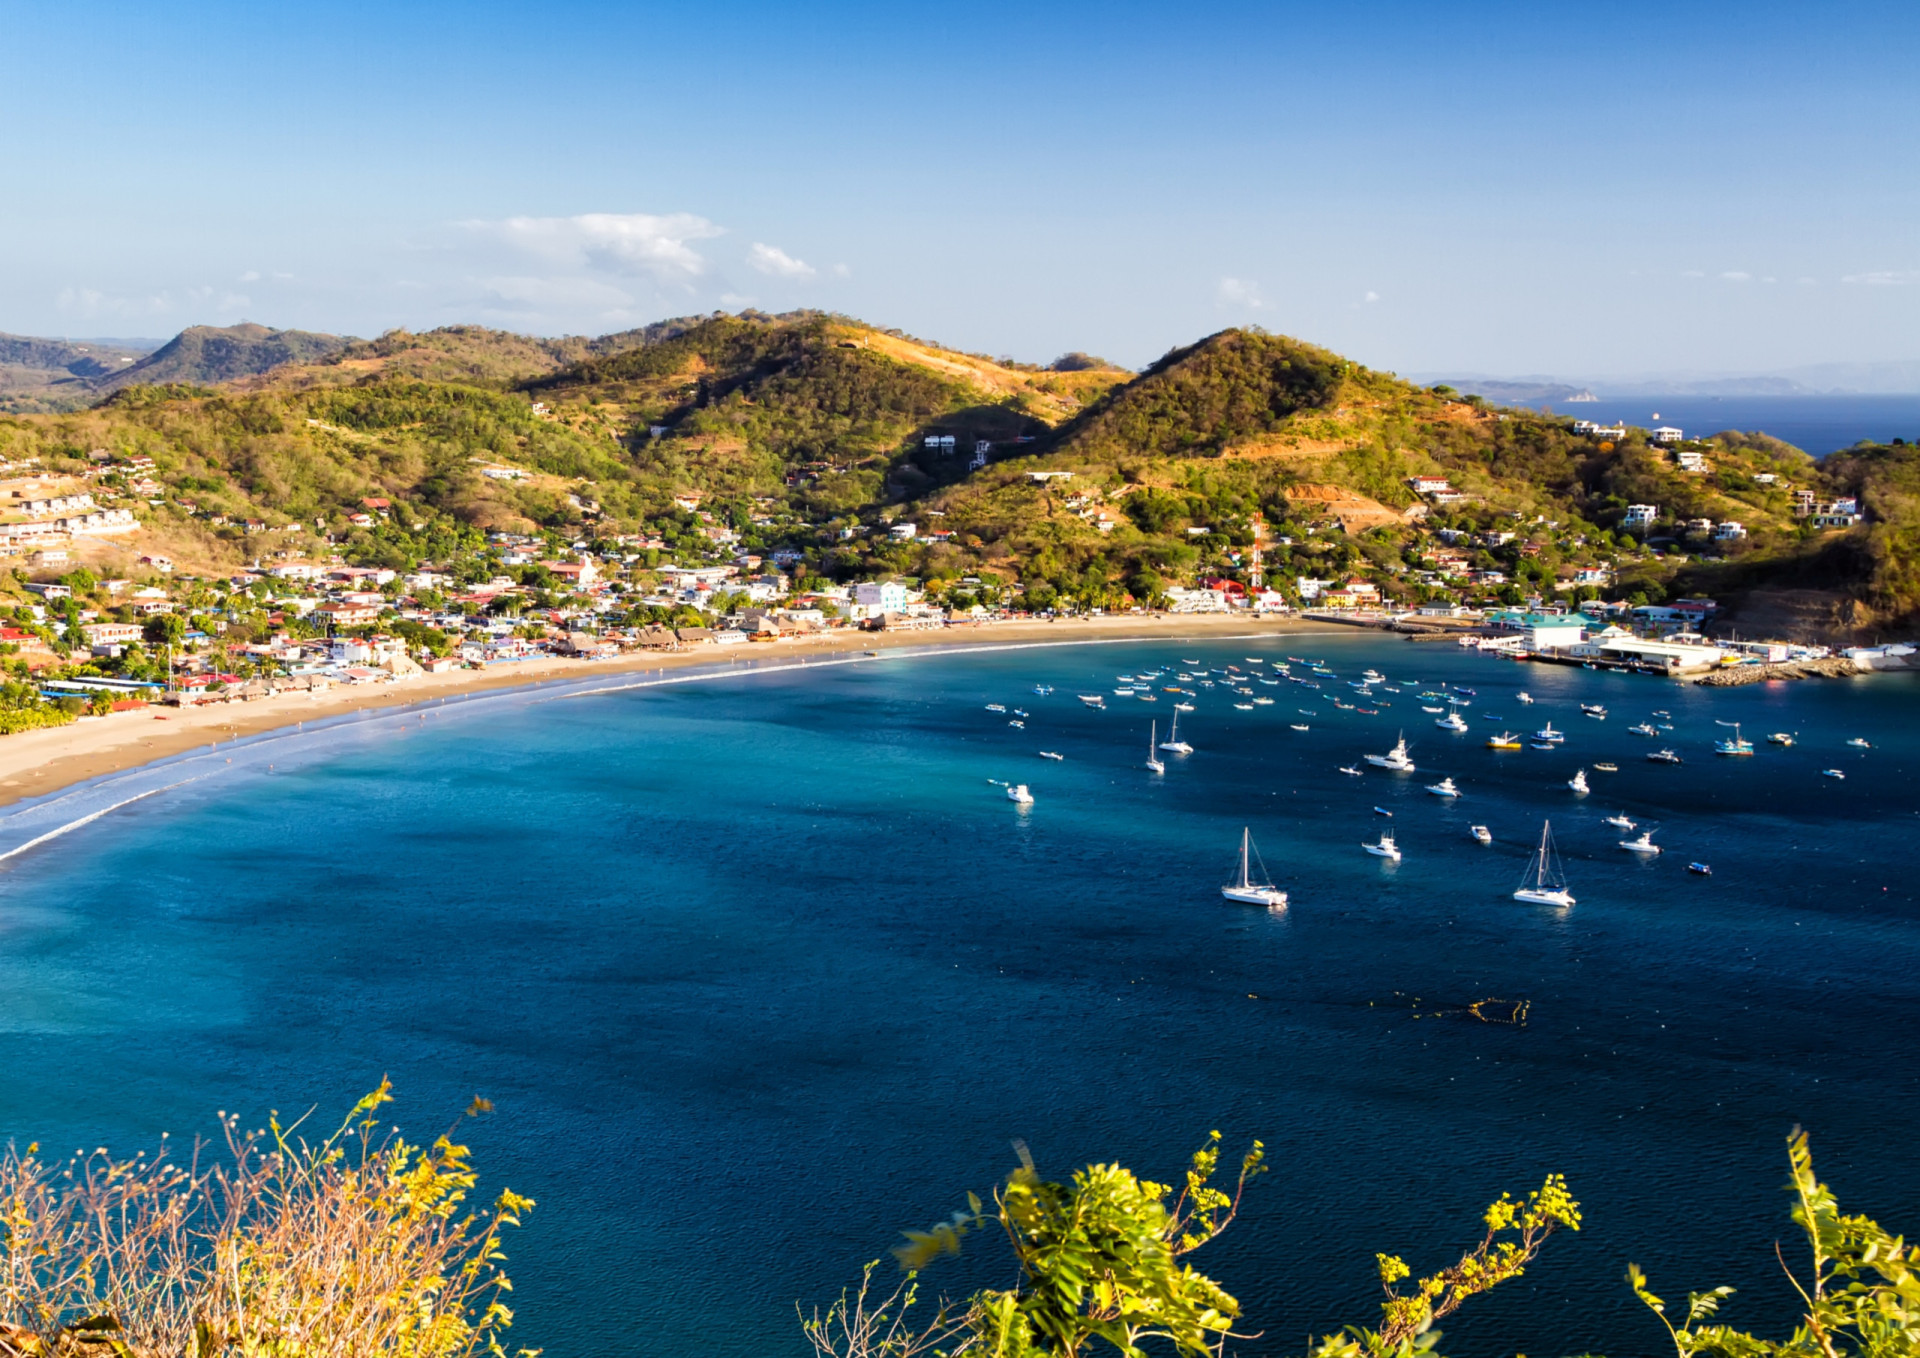 <p>This picturesque beach town is a Nicaraguan gem of a destination. Besides an alluring band of sand, San Juan del Sur captivates the visitor with a charming laid-back vibe and welcoming character. Definitely a place to relax in and recharge the batteries.</p>